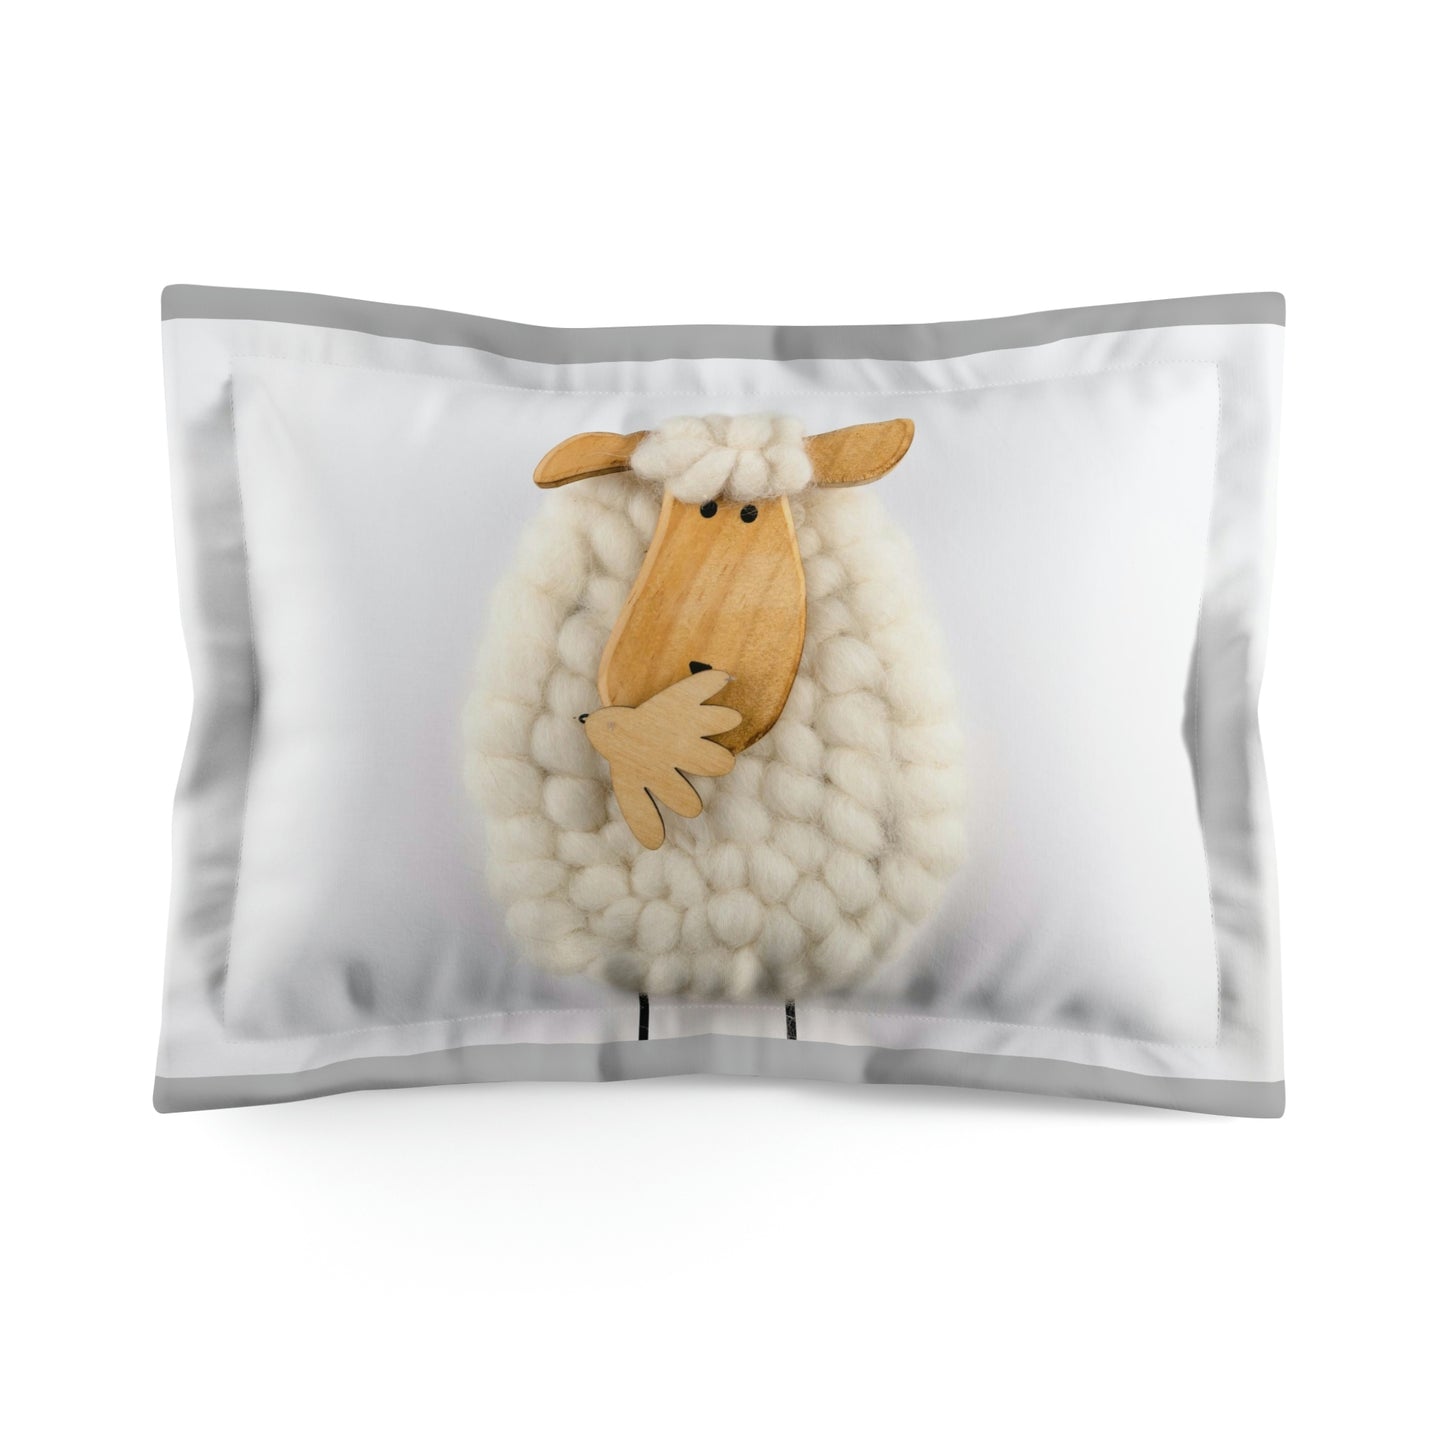 Pillow Sham "Oops  Did I Wake You Up Sheep" Multiple End Colors/ Microfiber Pillow Sham